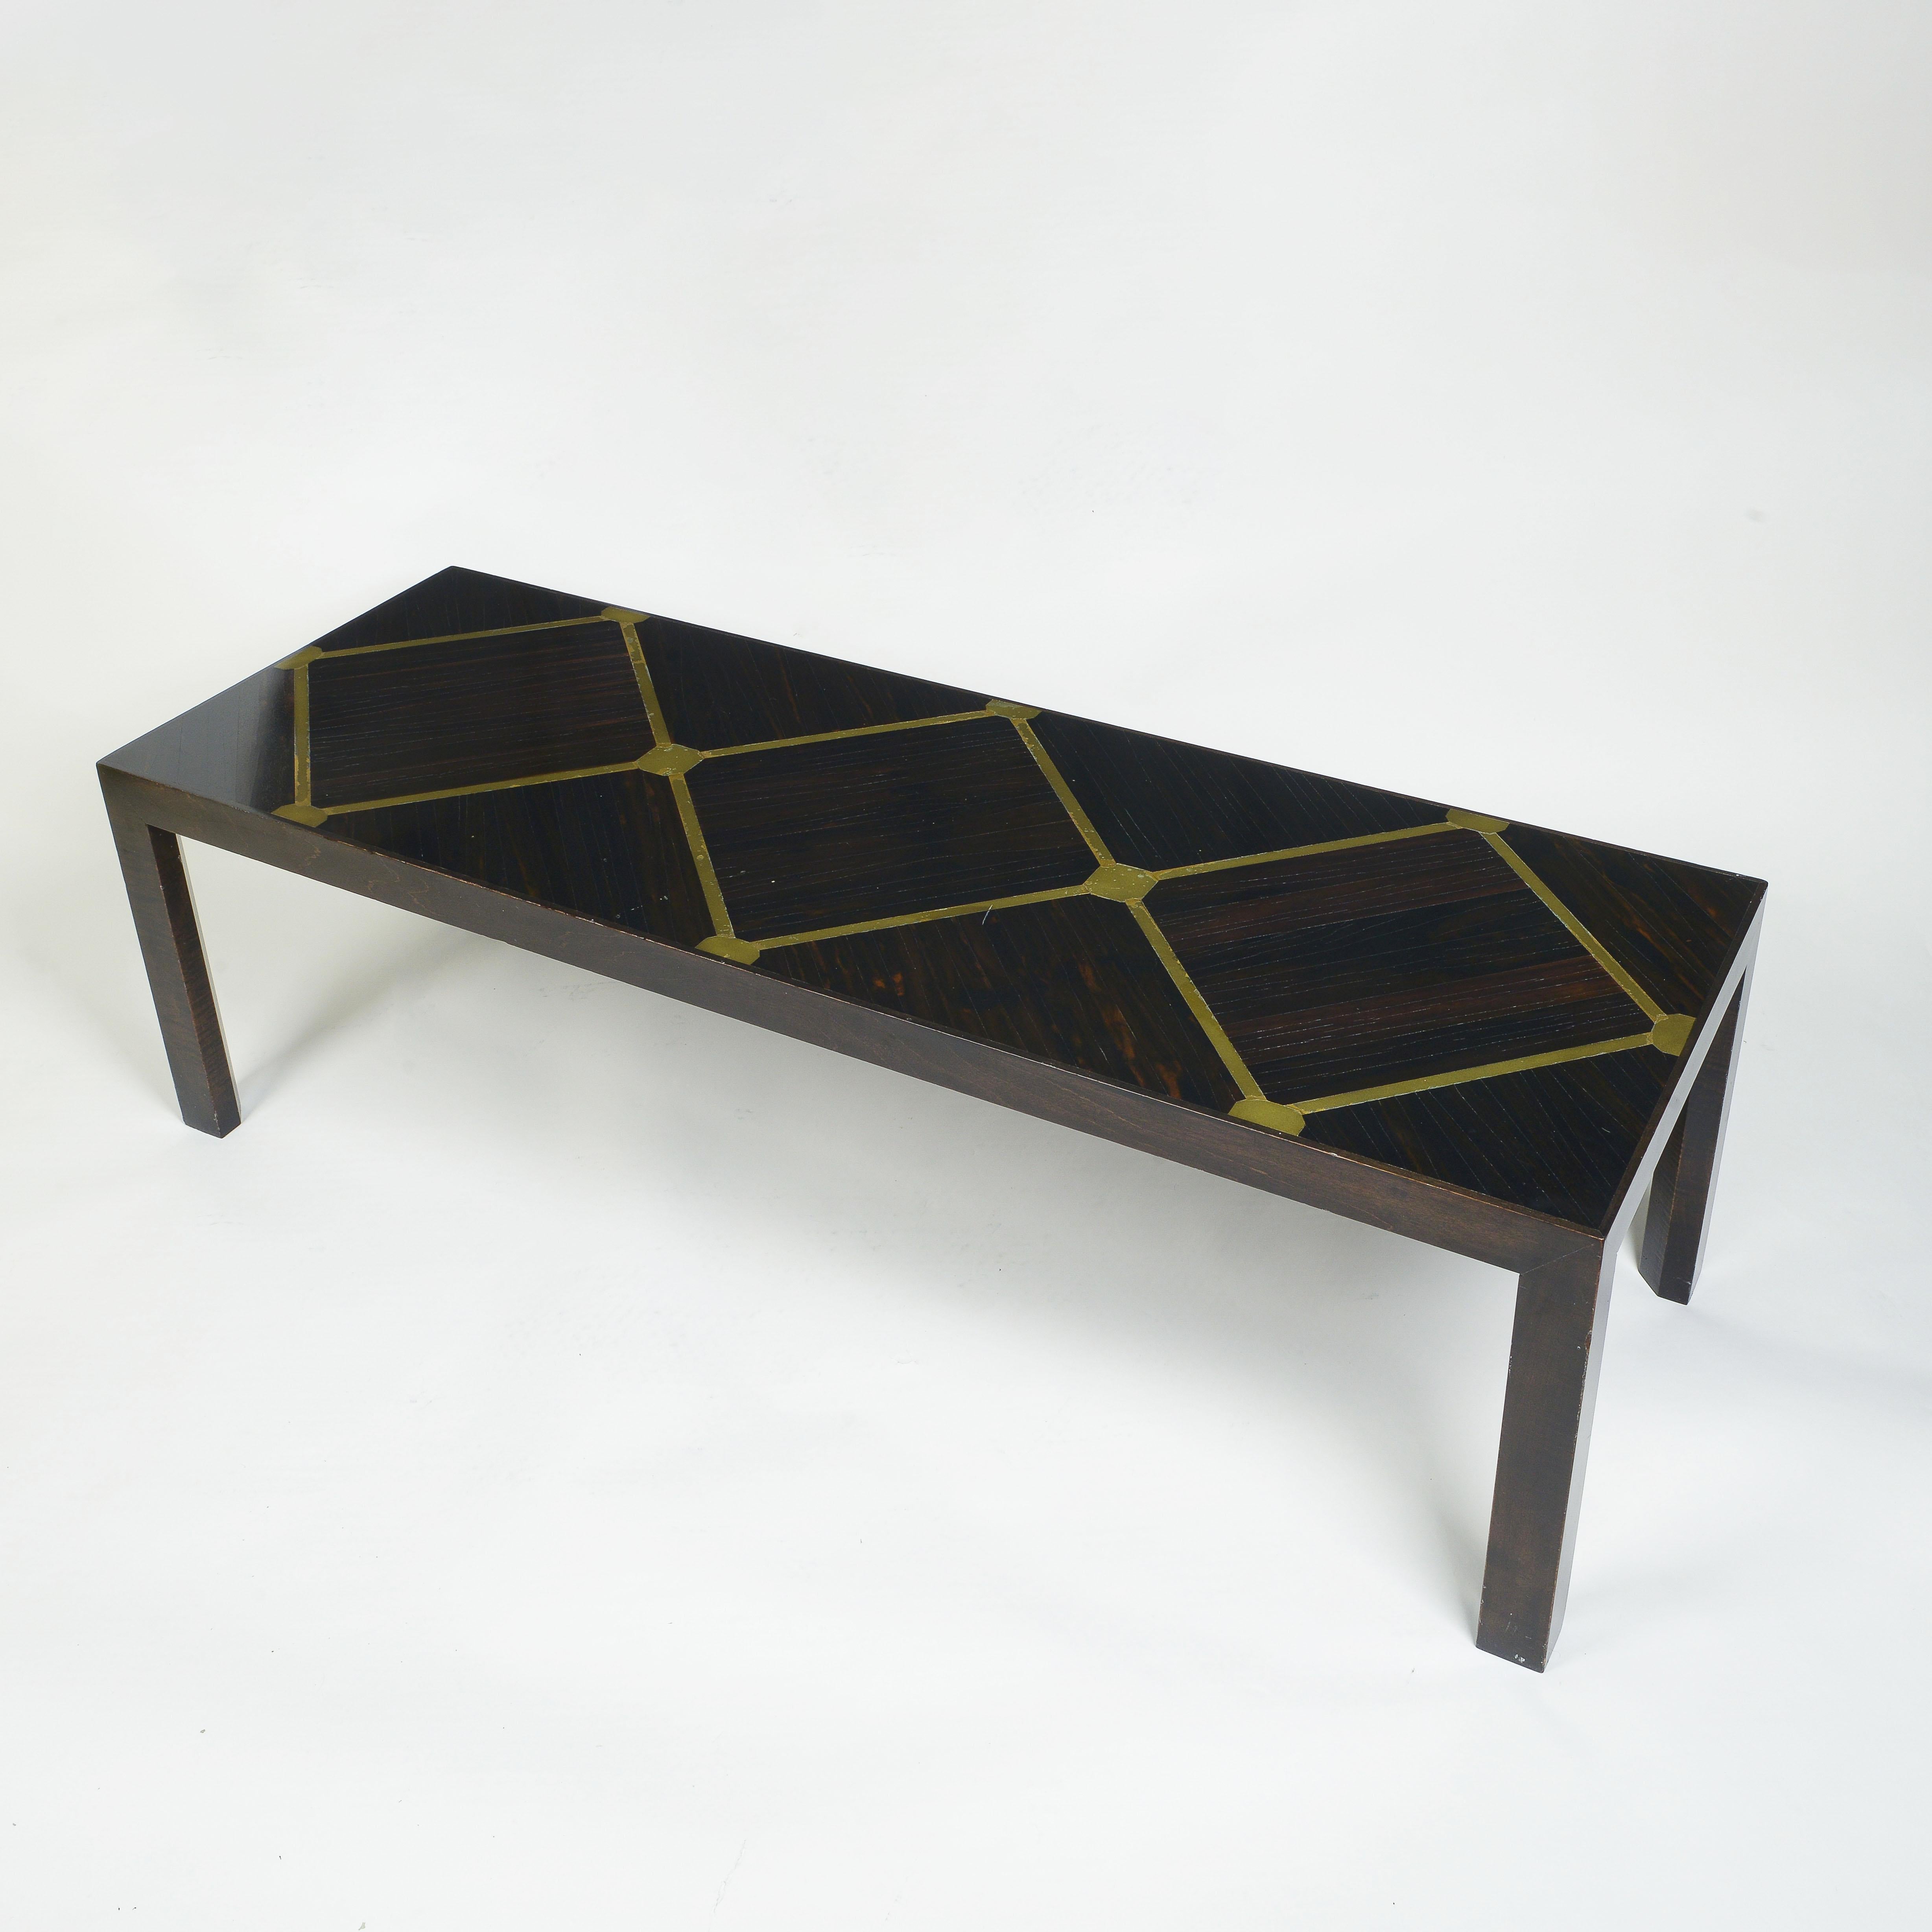 The long rectangular top inlaid into the rosewood with brass in a trellis design; raised on four square straight legs.